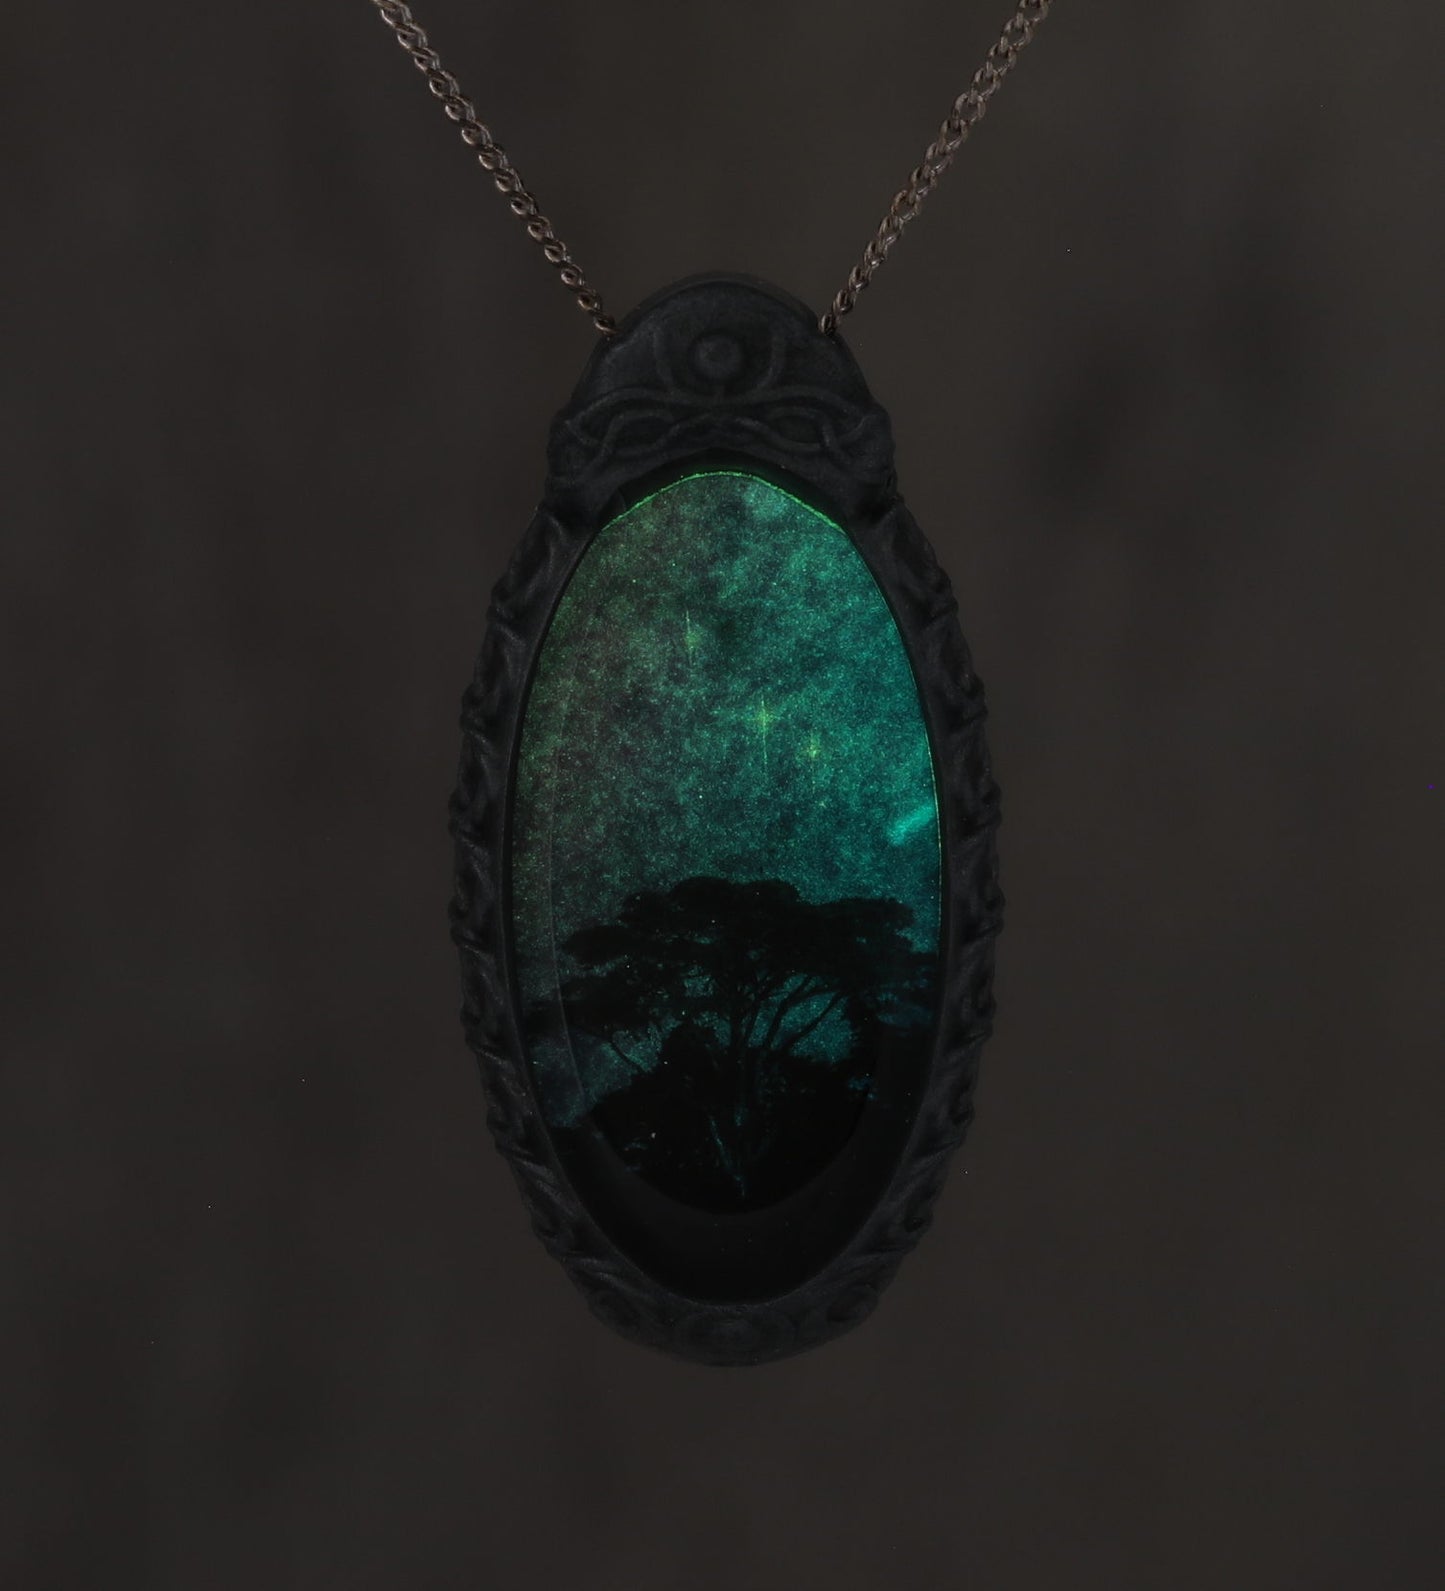 Trees Dreaming - Galaxy Pendant with Celtic Knotwork  made with a photo of a tree and the Carina Nebula!